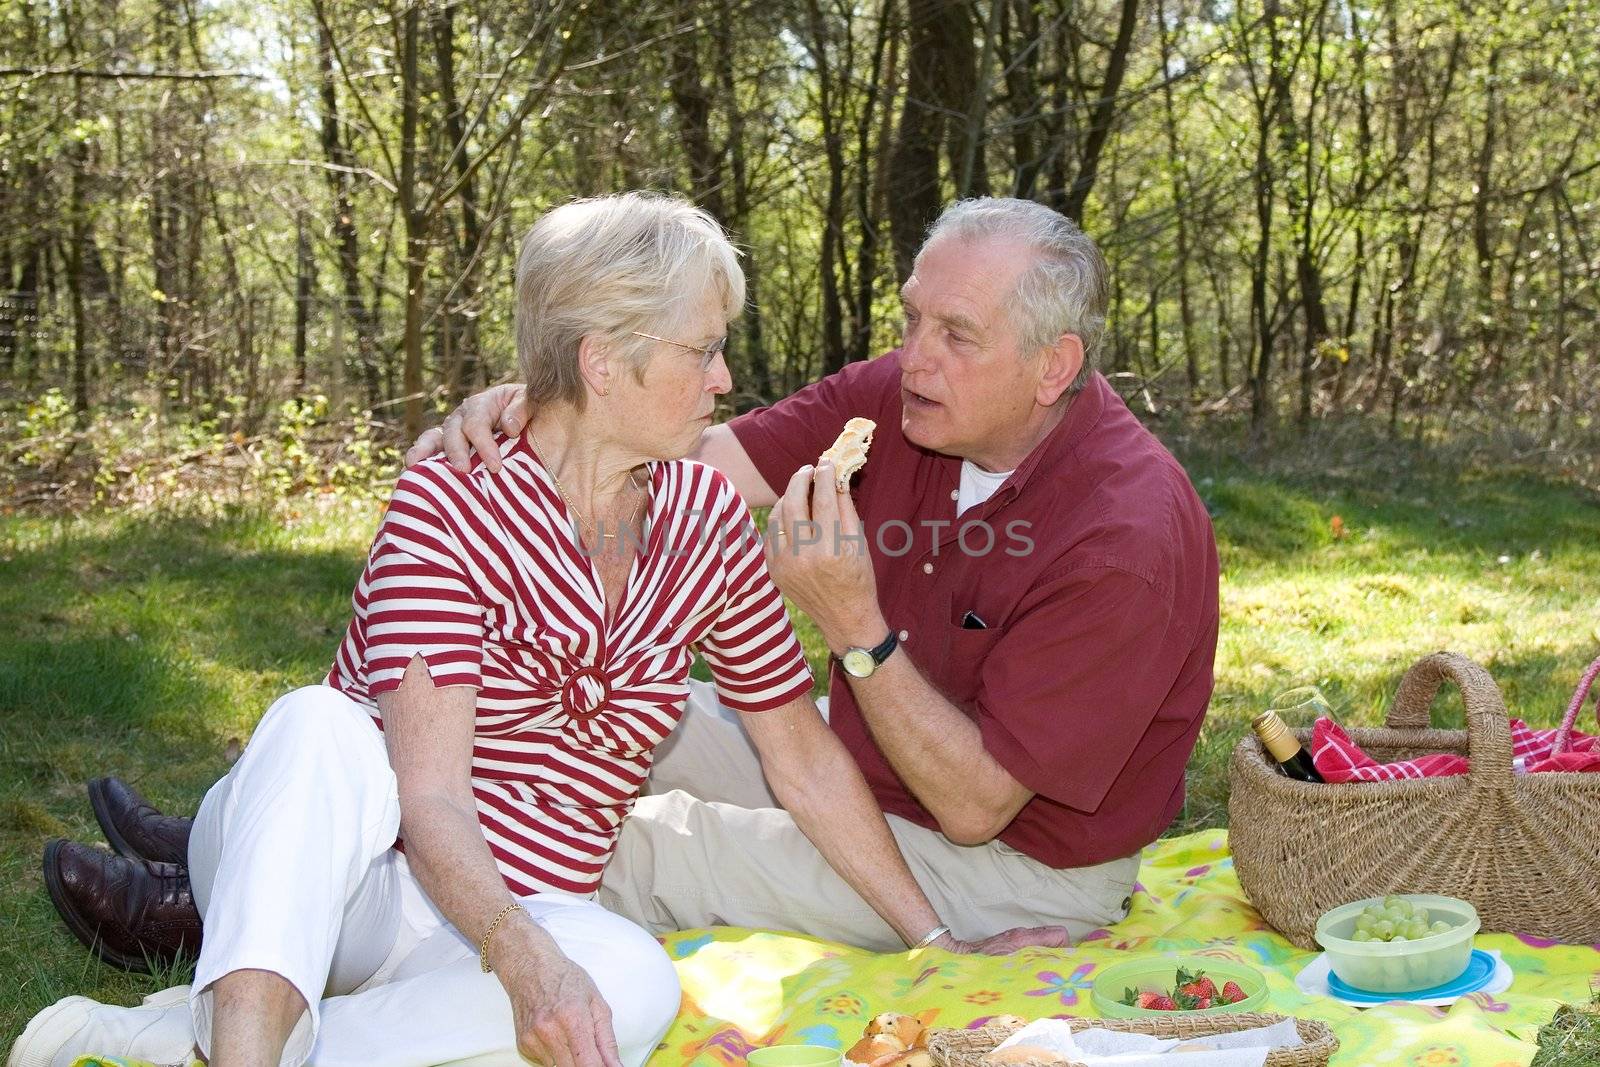 Elderly couple enjoying a leisurely picnic outdoors in the forest on a summerday